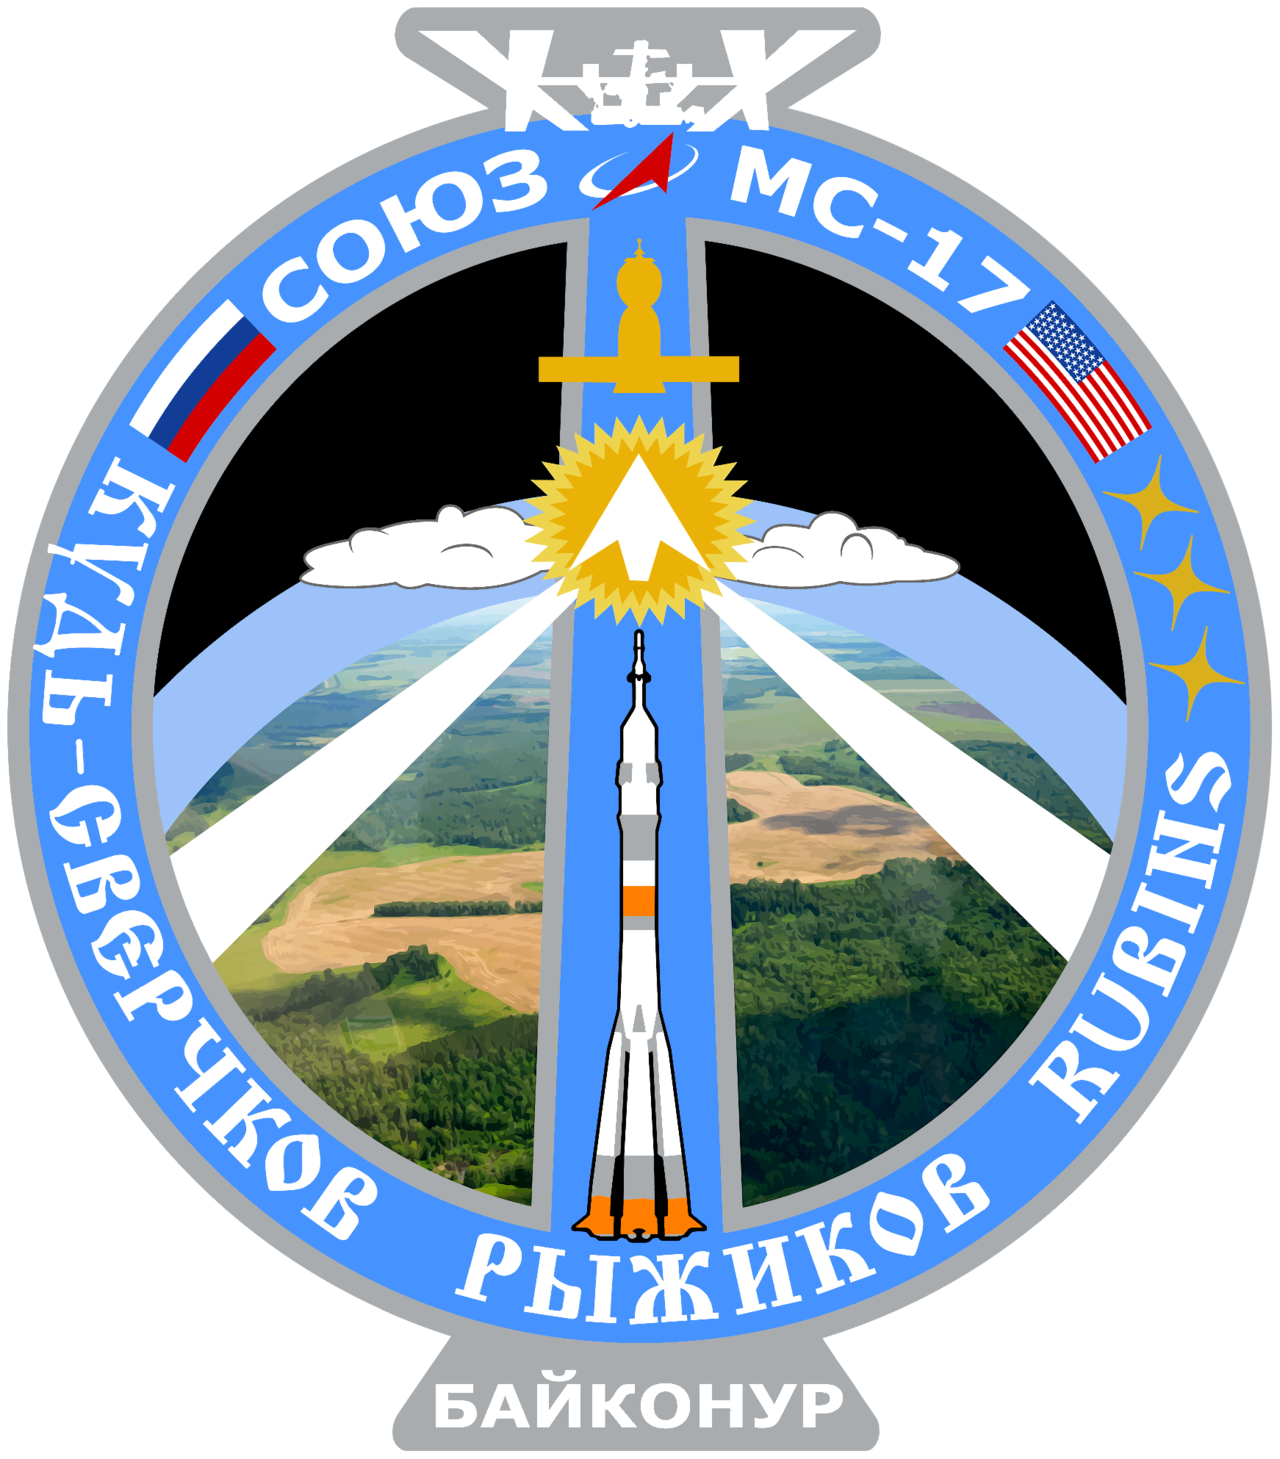 Mission patch for Soyuz MS-17